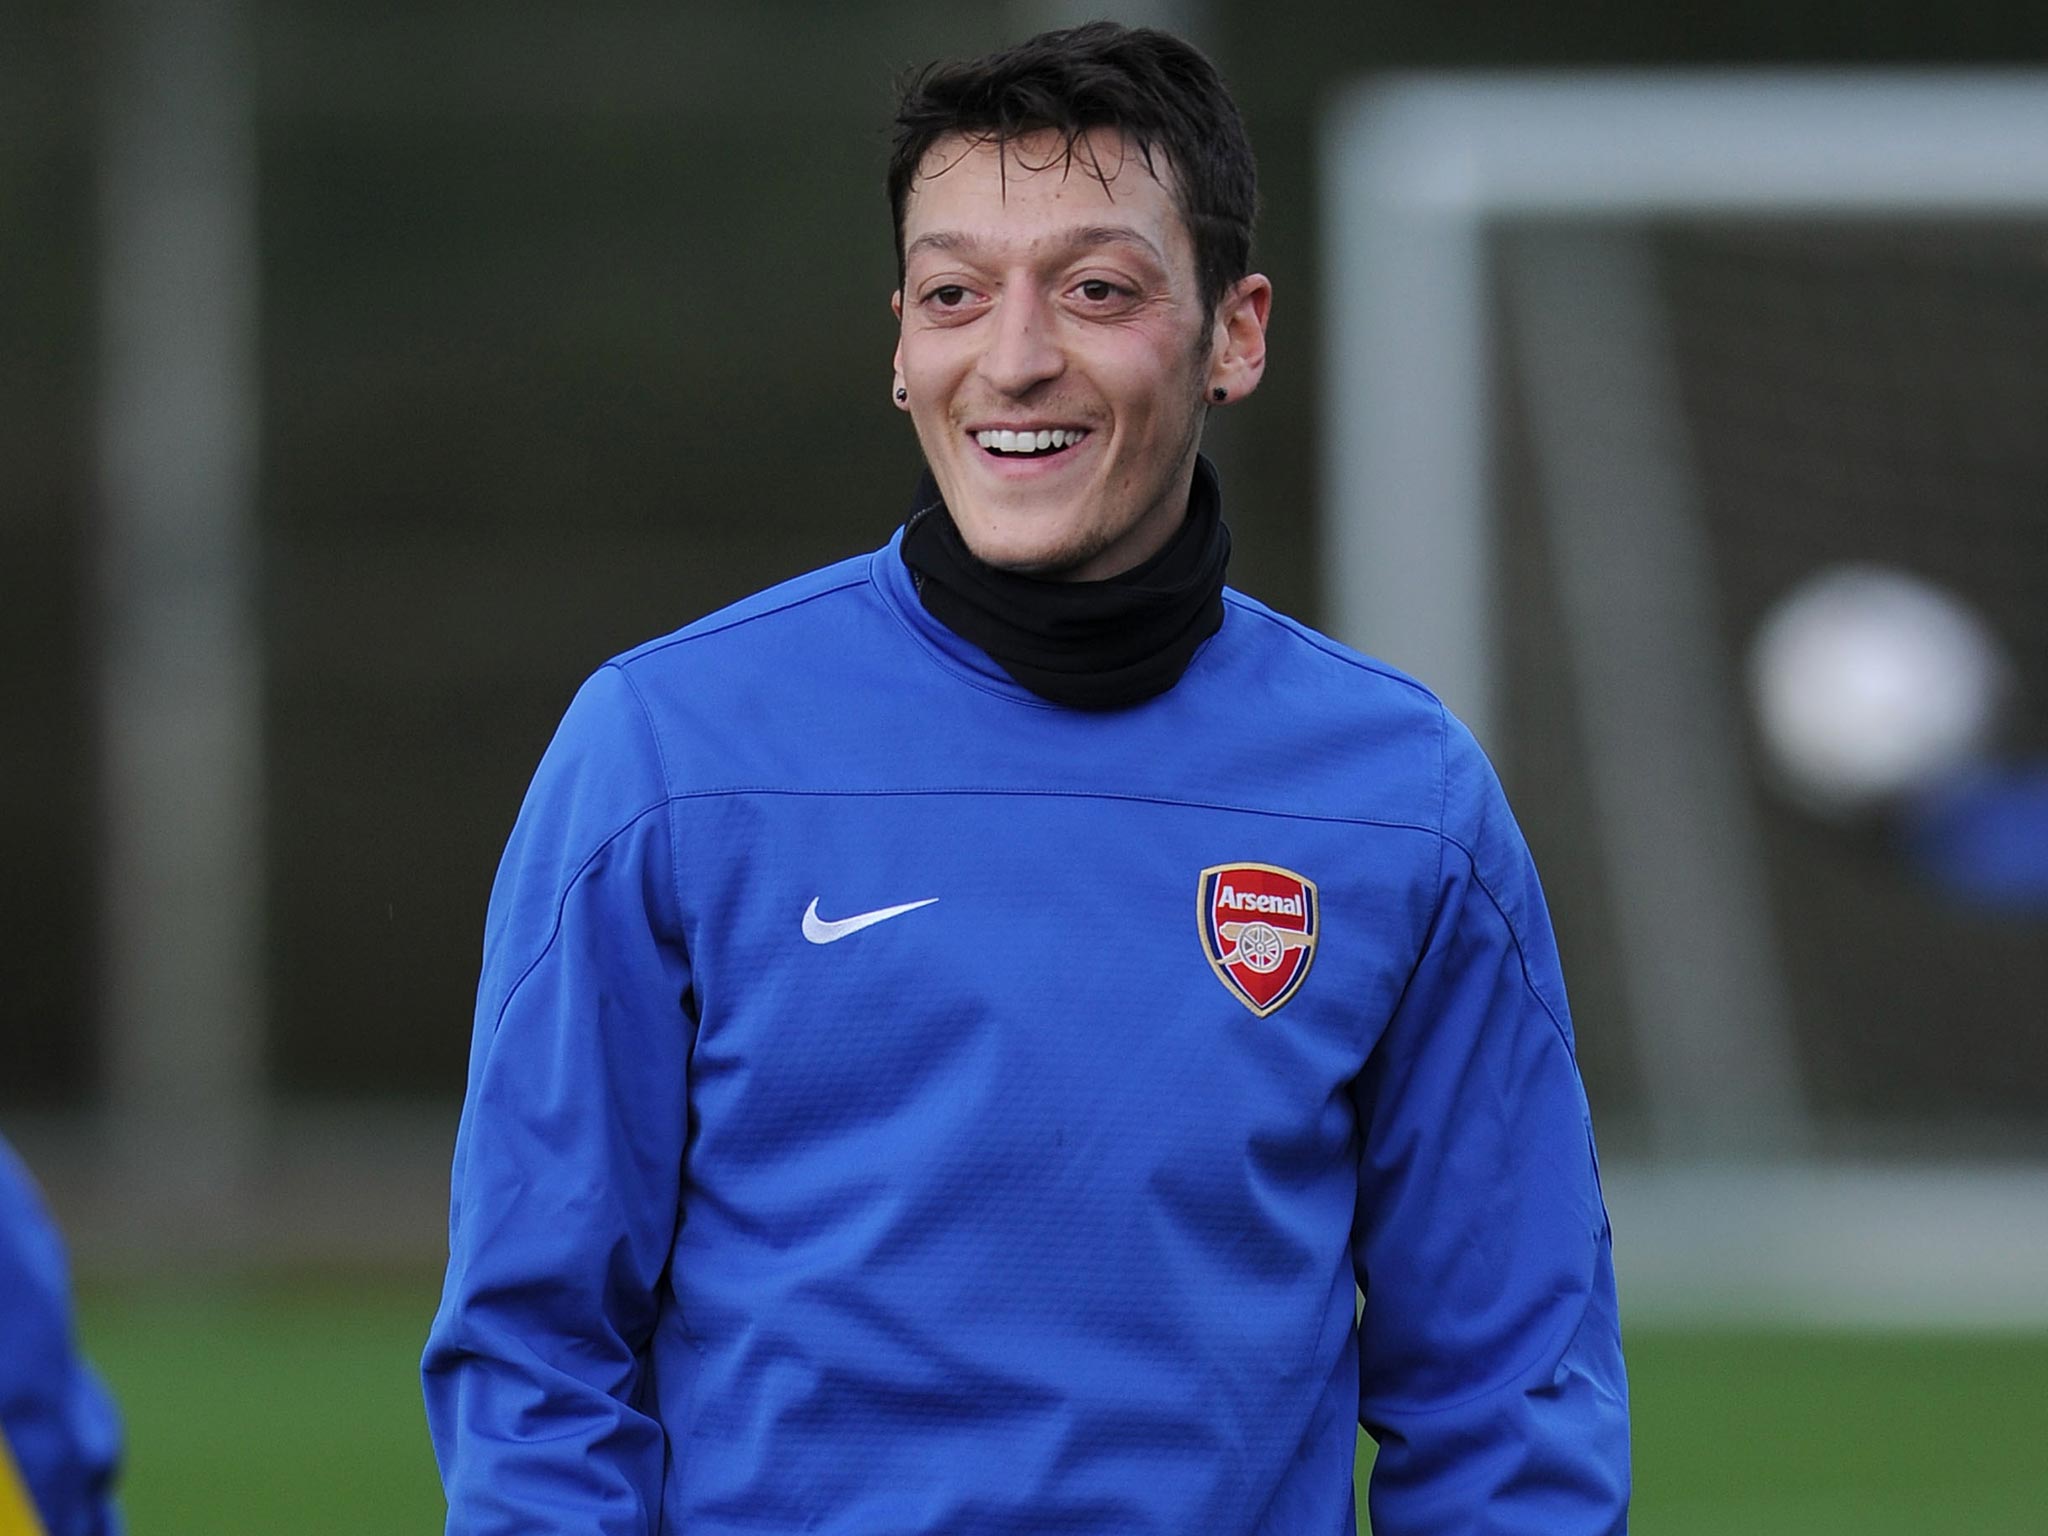 Mesut Ozil is back in the Arsenal squad to face Stoke